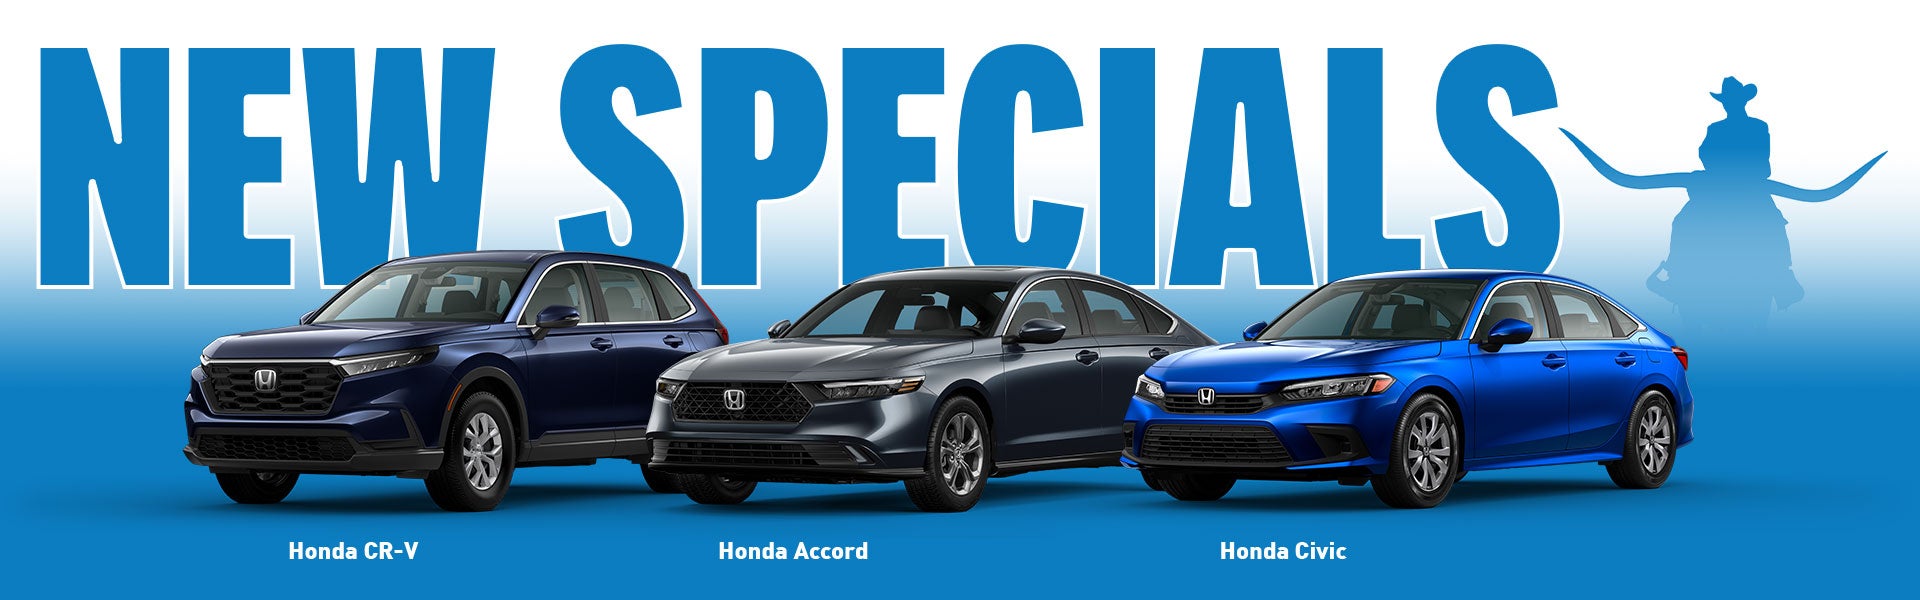 We're receiving New inventory Daily! View our Specials